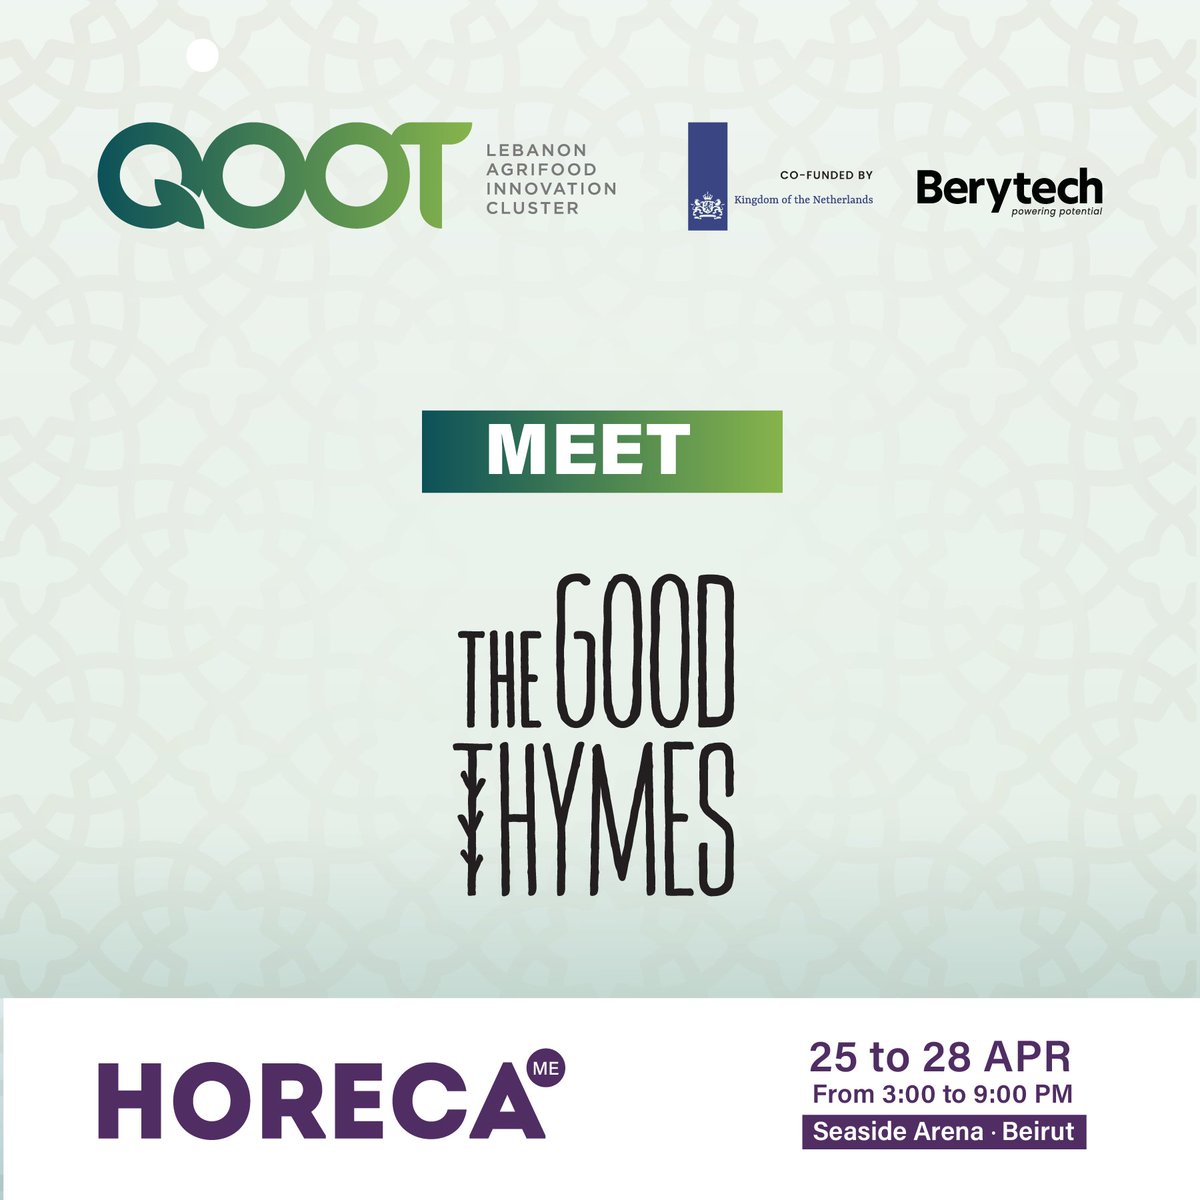 Discover the innovative products of The Good Thymes, member of the QOOT cluster showcasing at the #HORECA exhibition. 
Check out QOOT’s booth on April 25 – 28 from 3 to 9 pm at the Seaside Arena, Beirut.

qoot.org/qoot-cluster-s…

@horecashow #HORECALebanon #QOOTinHORECA